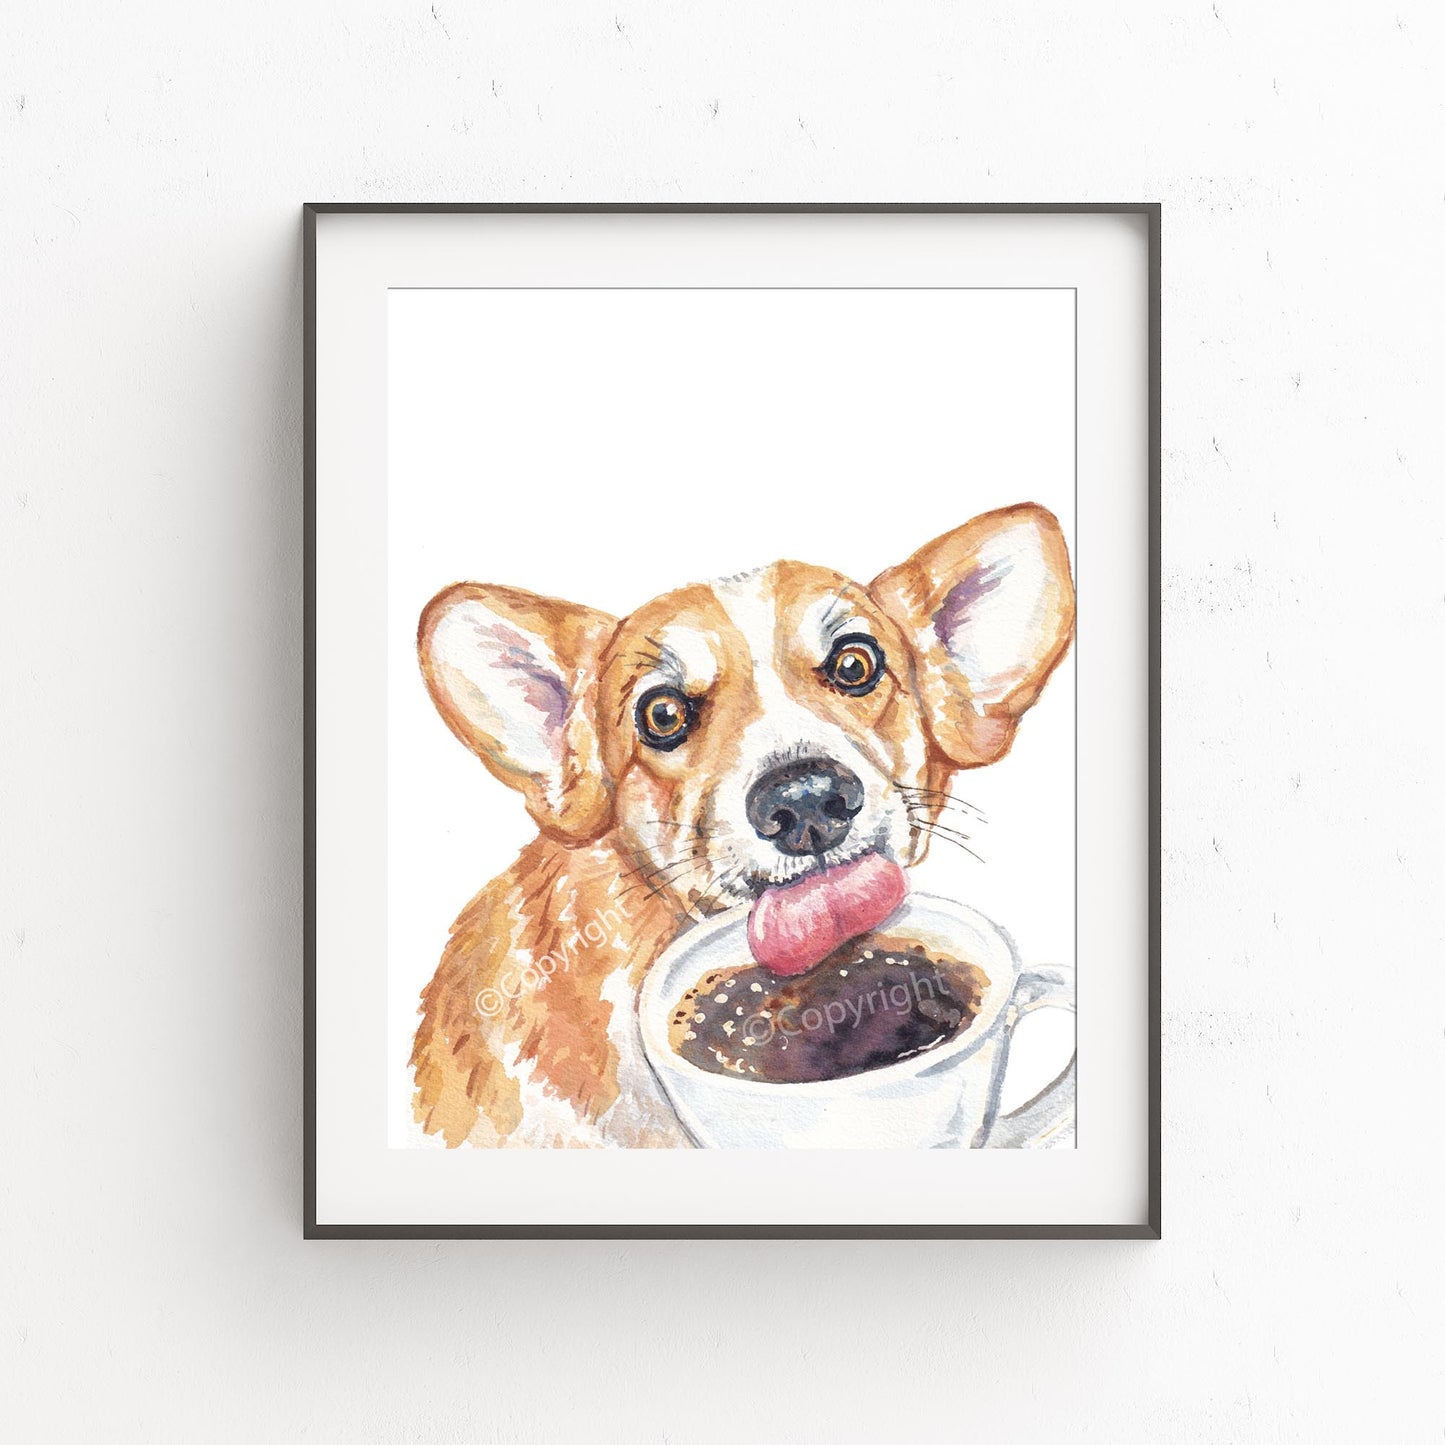 Watercolour painting of a corgi dog drinking coffee from a cup by Deidre Wicks